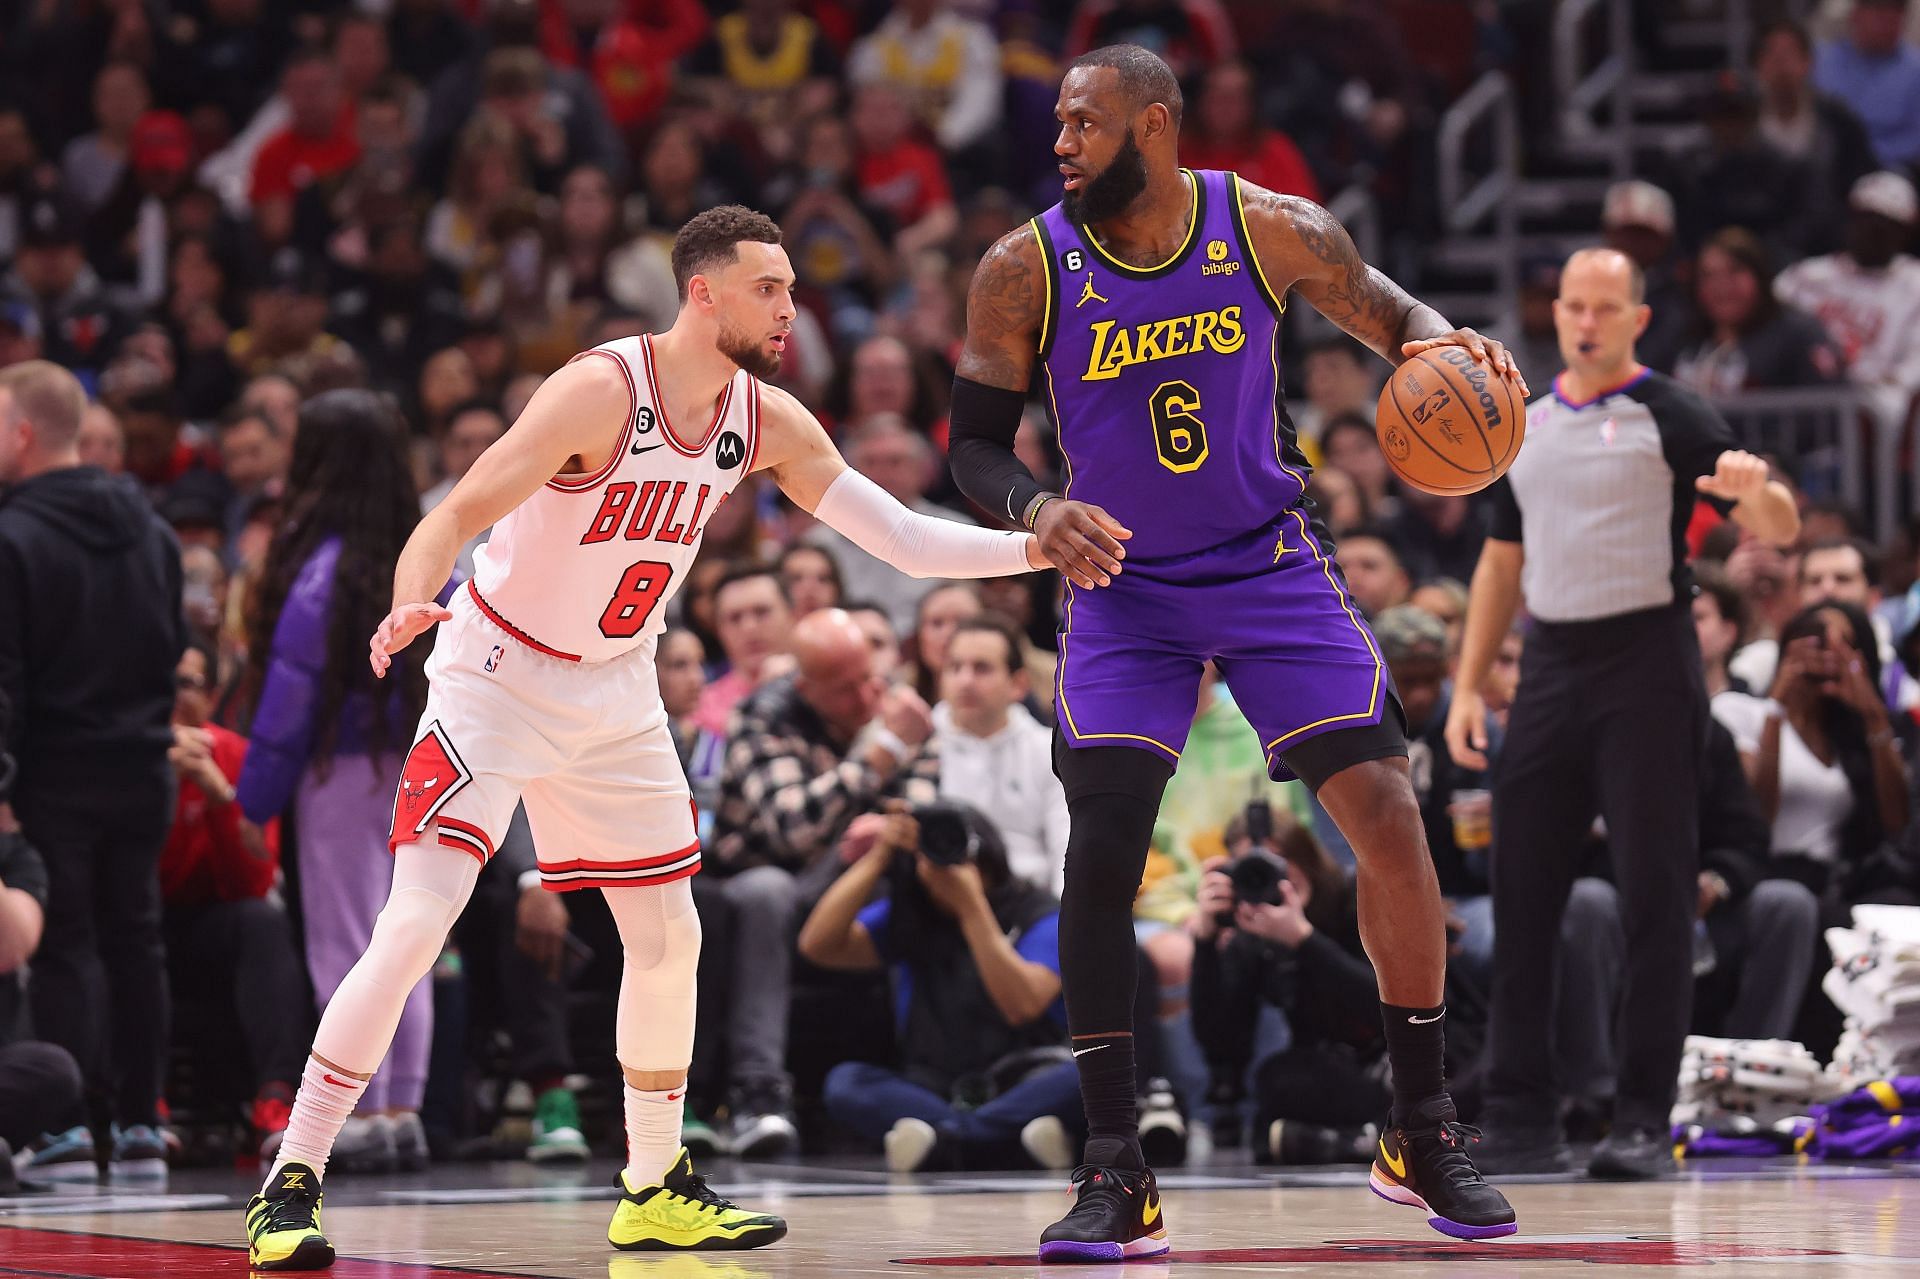 Zach LaVine of the Chicago Bulls and LeBron James (right) of the LA Lakers